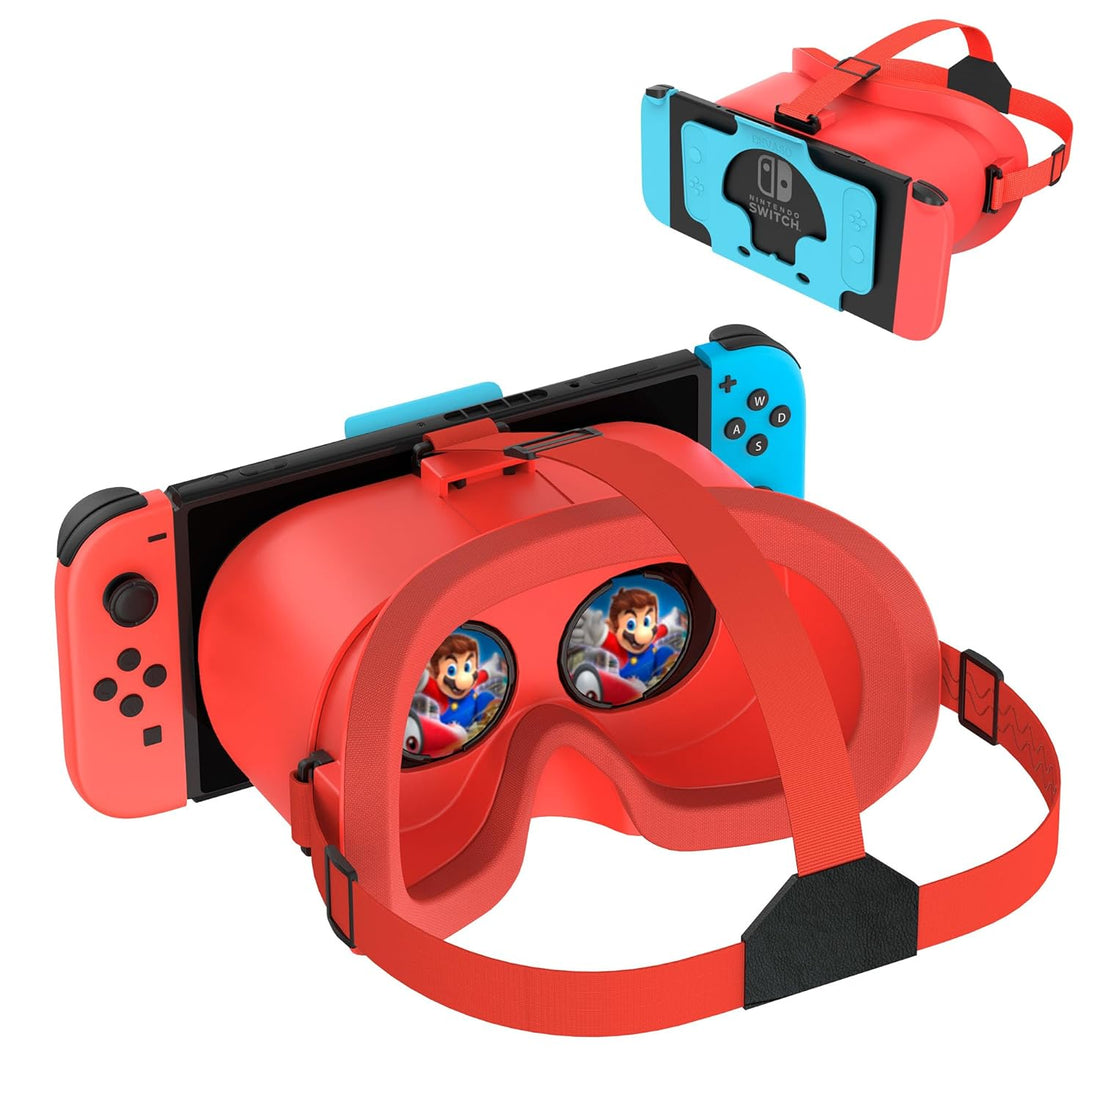 DEVASO Upgraded VR Headset for Nintendo Switch & Switch OLED, Switch Virtual Reality Glasses with Adjustable HD Lenses and Comfortable Head Strap, Labo VR Kit 3D Goggles for Switch Accessories